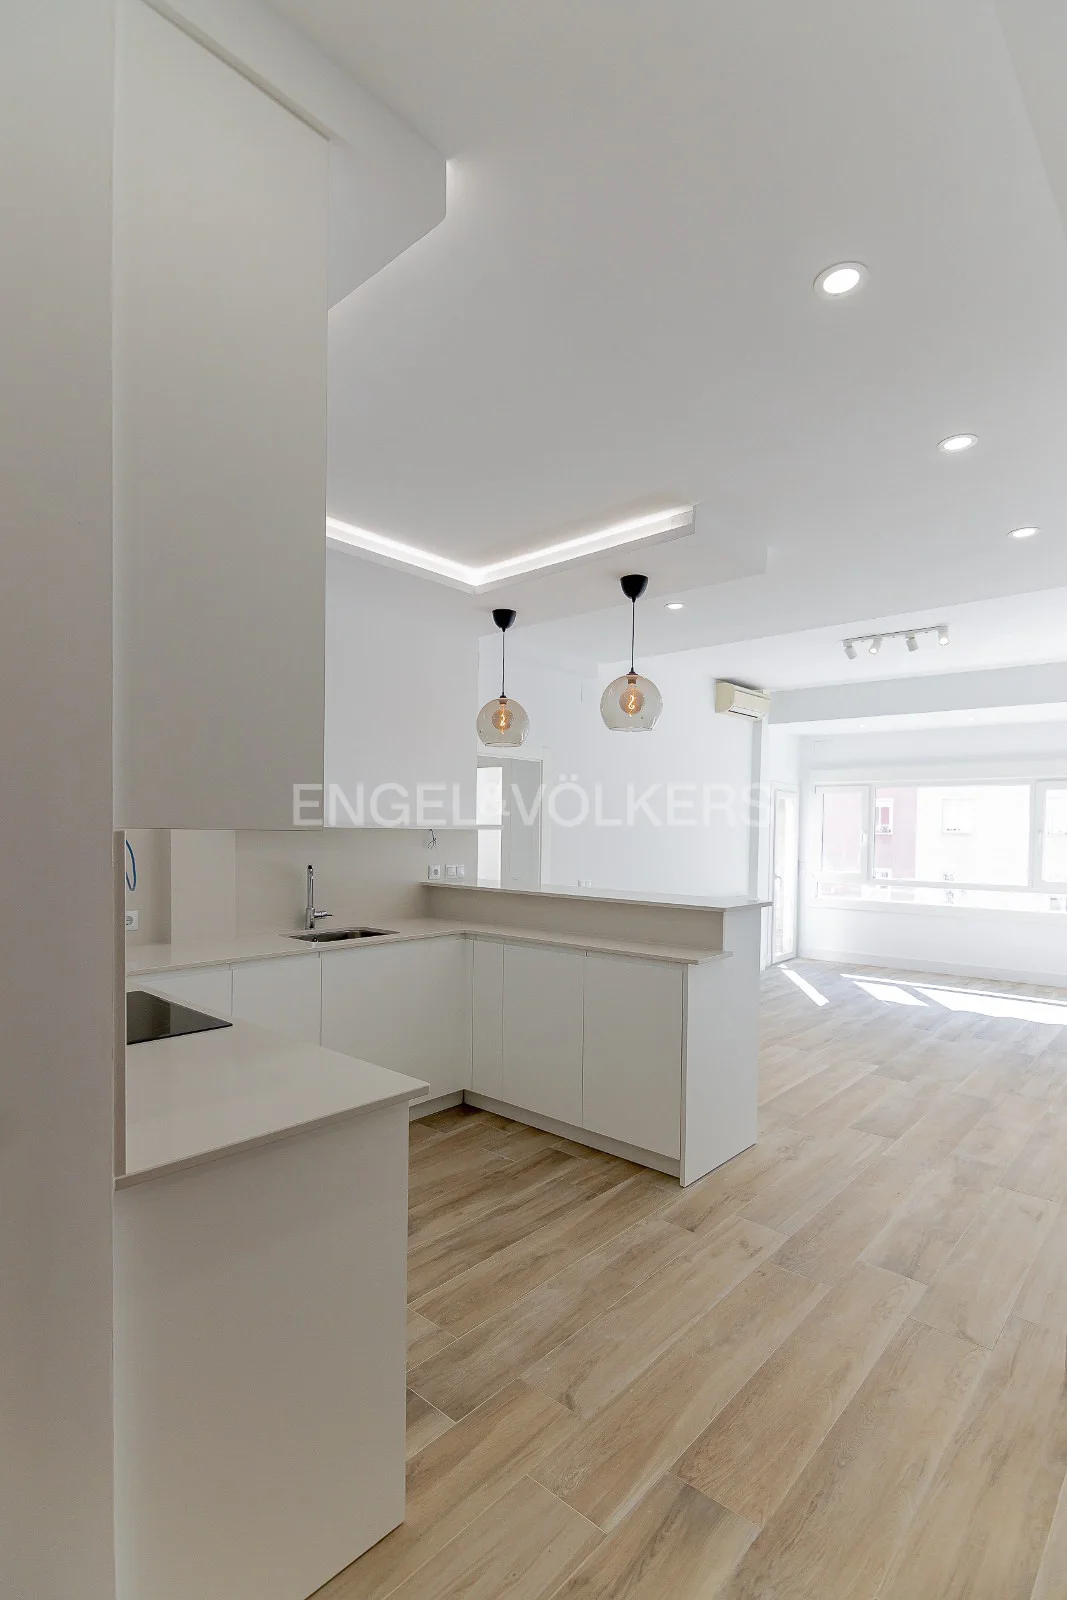 Bright and renovated 3-bedroom apartment in Chamartin